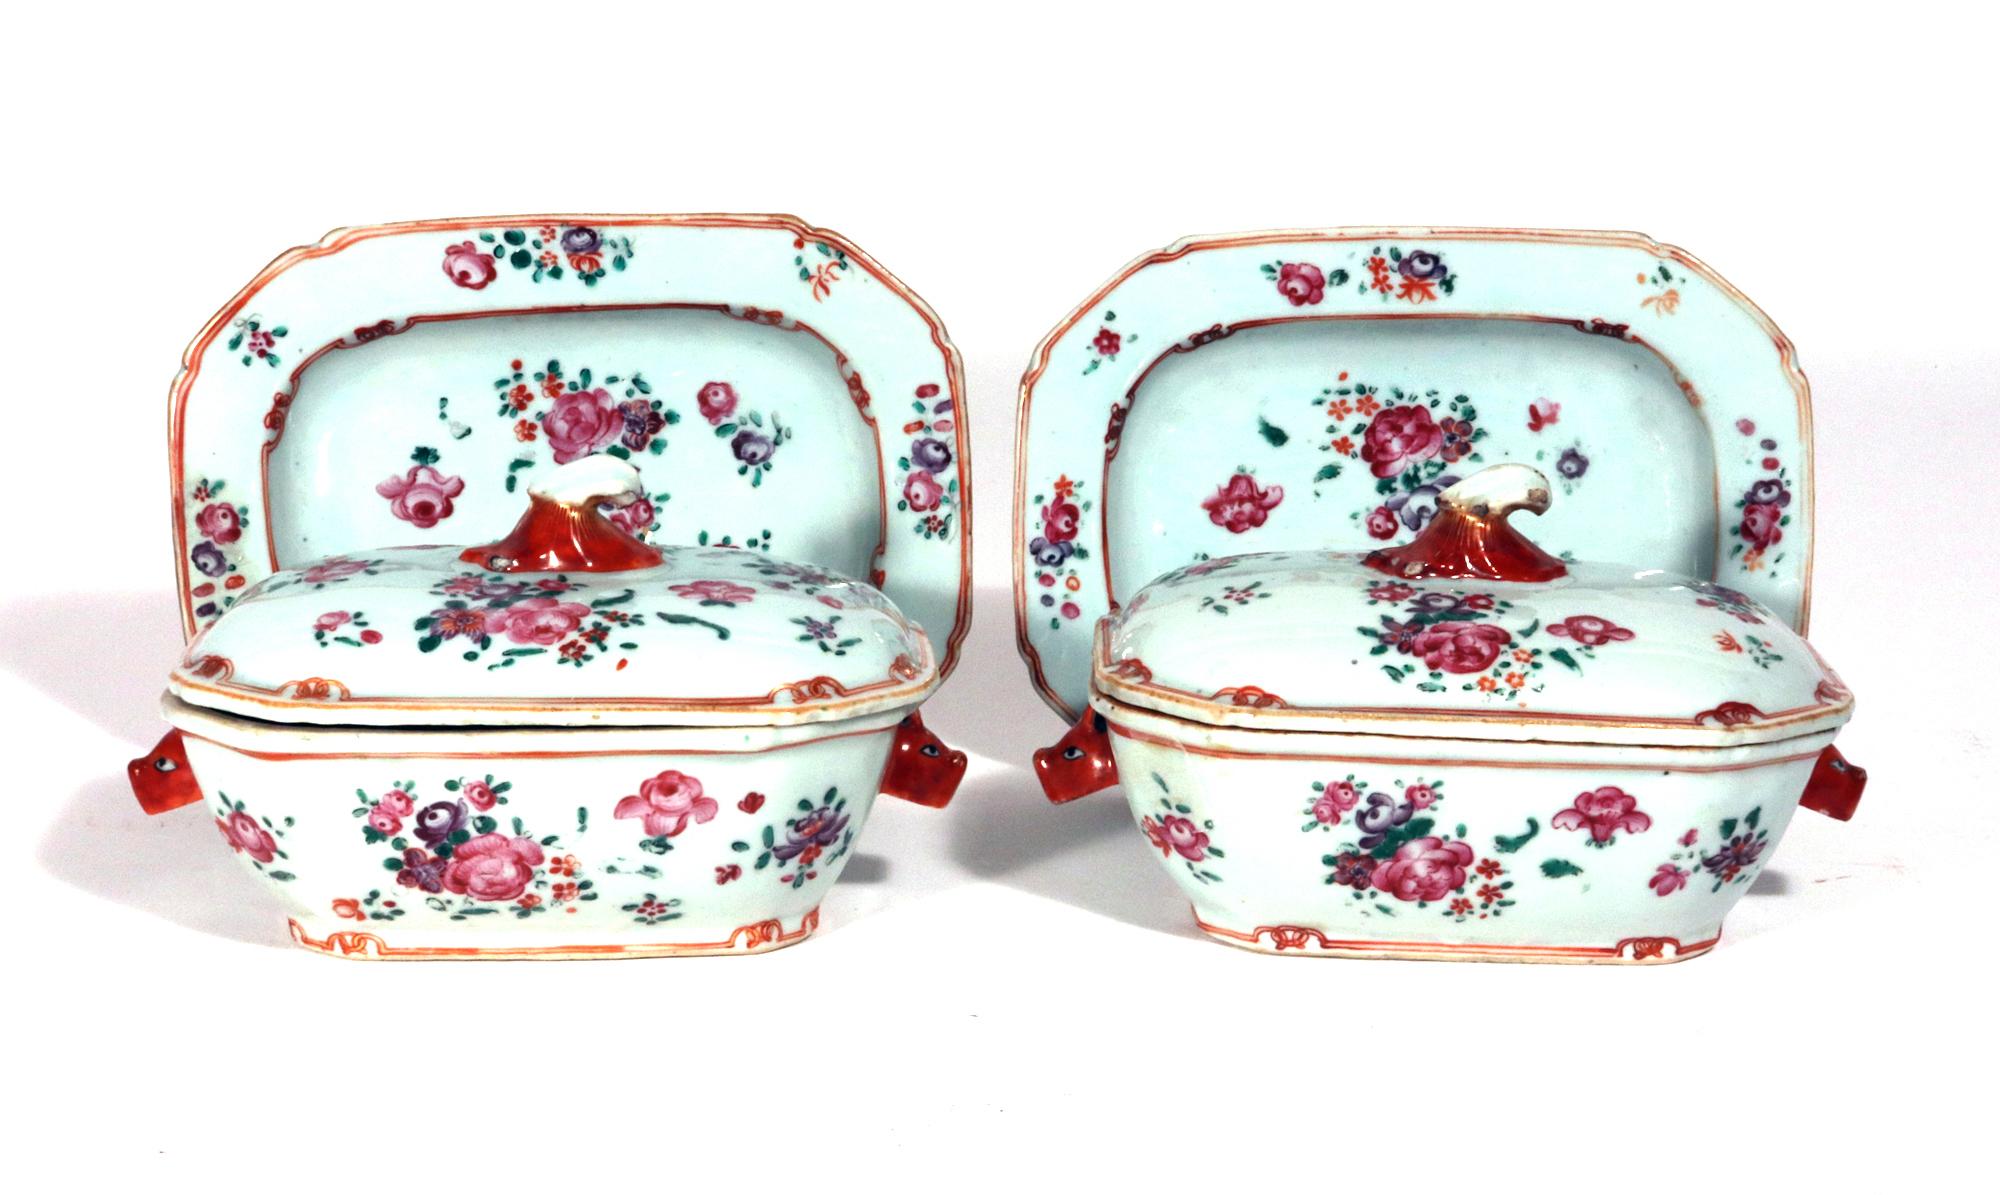 Chinese Export Porcelain Famille Rose Sauce Tureens, Covers & Stands,
A Pair,
Circa 1775

The pair of Chinese Export porcelain sauce tureens are of a shaped rectangular form and are painted with scattered European-style flowers on the body and the